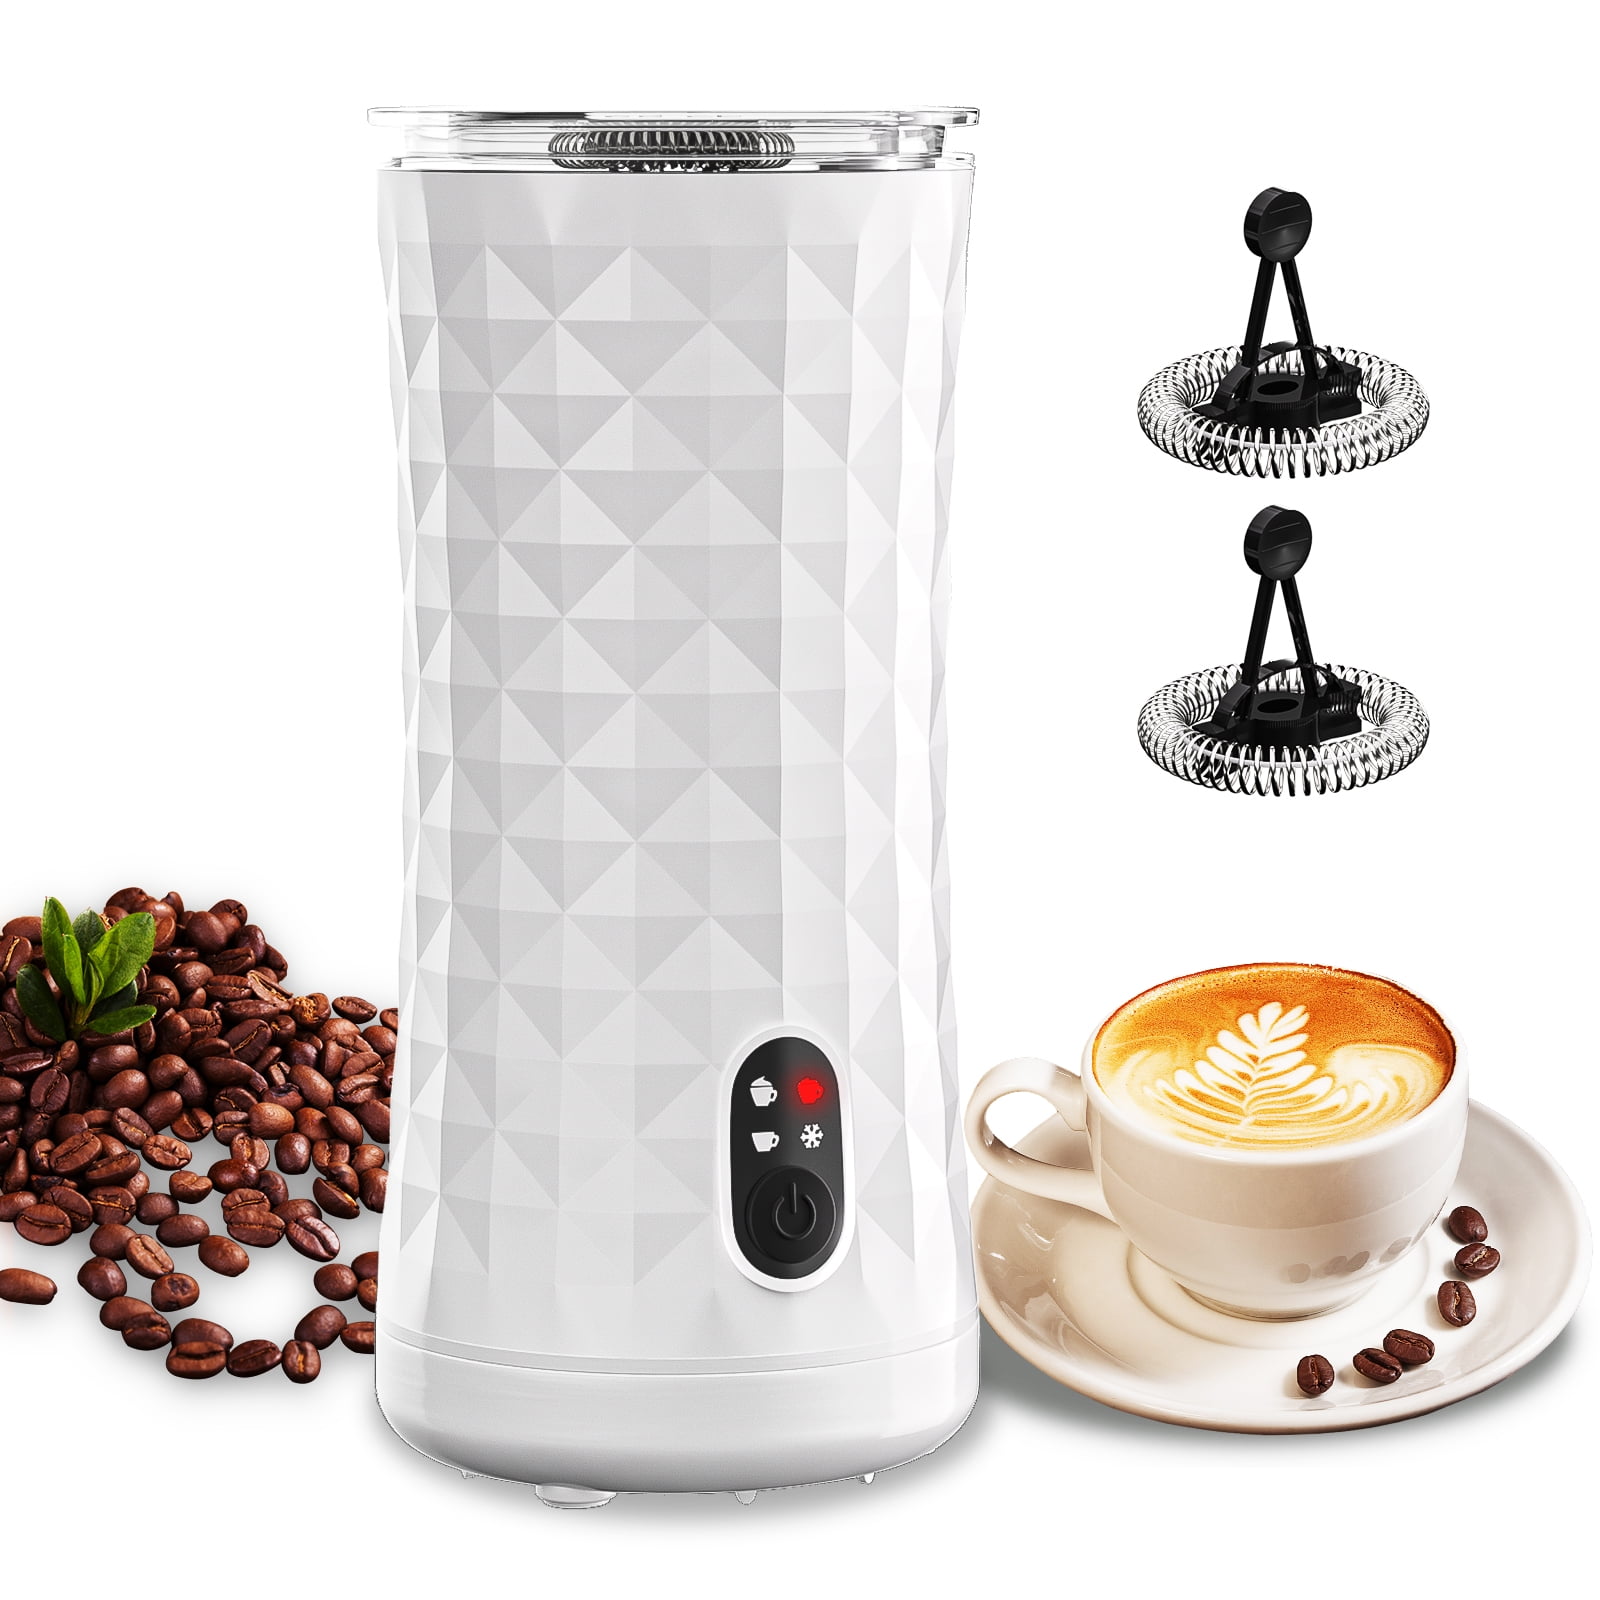 Bonjour La Petite Coffee French Press and Milk Frother Set (2 PC